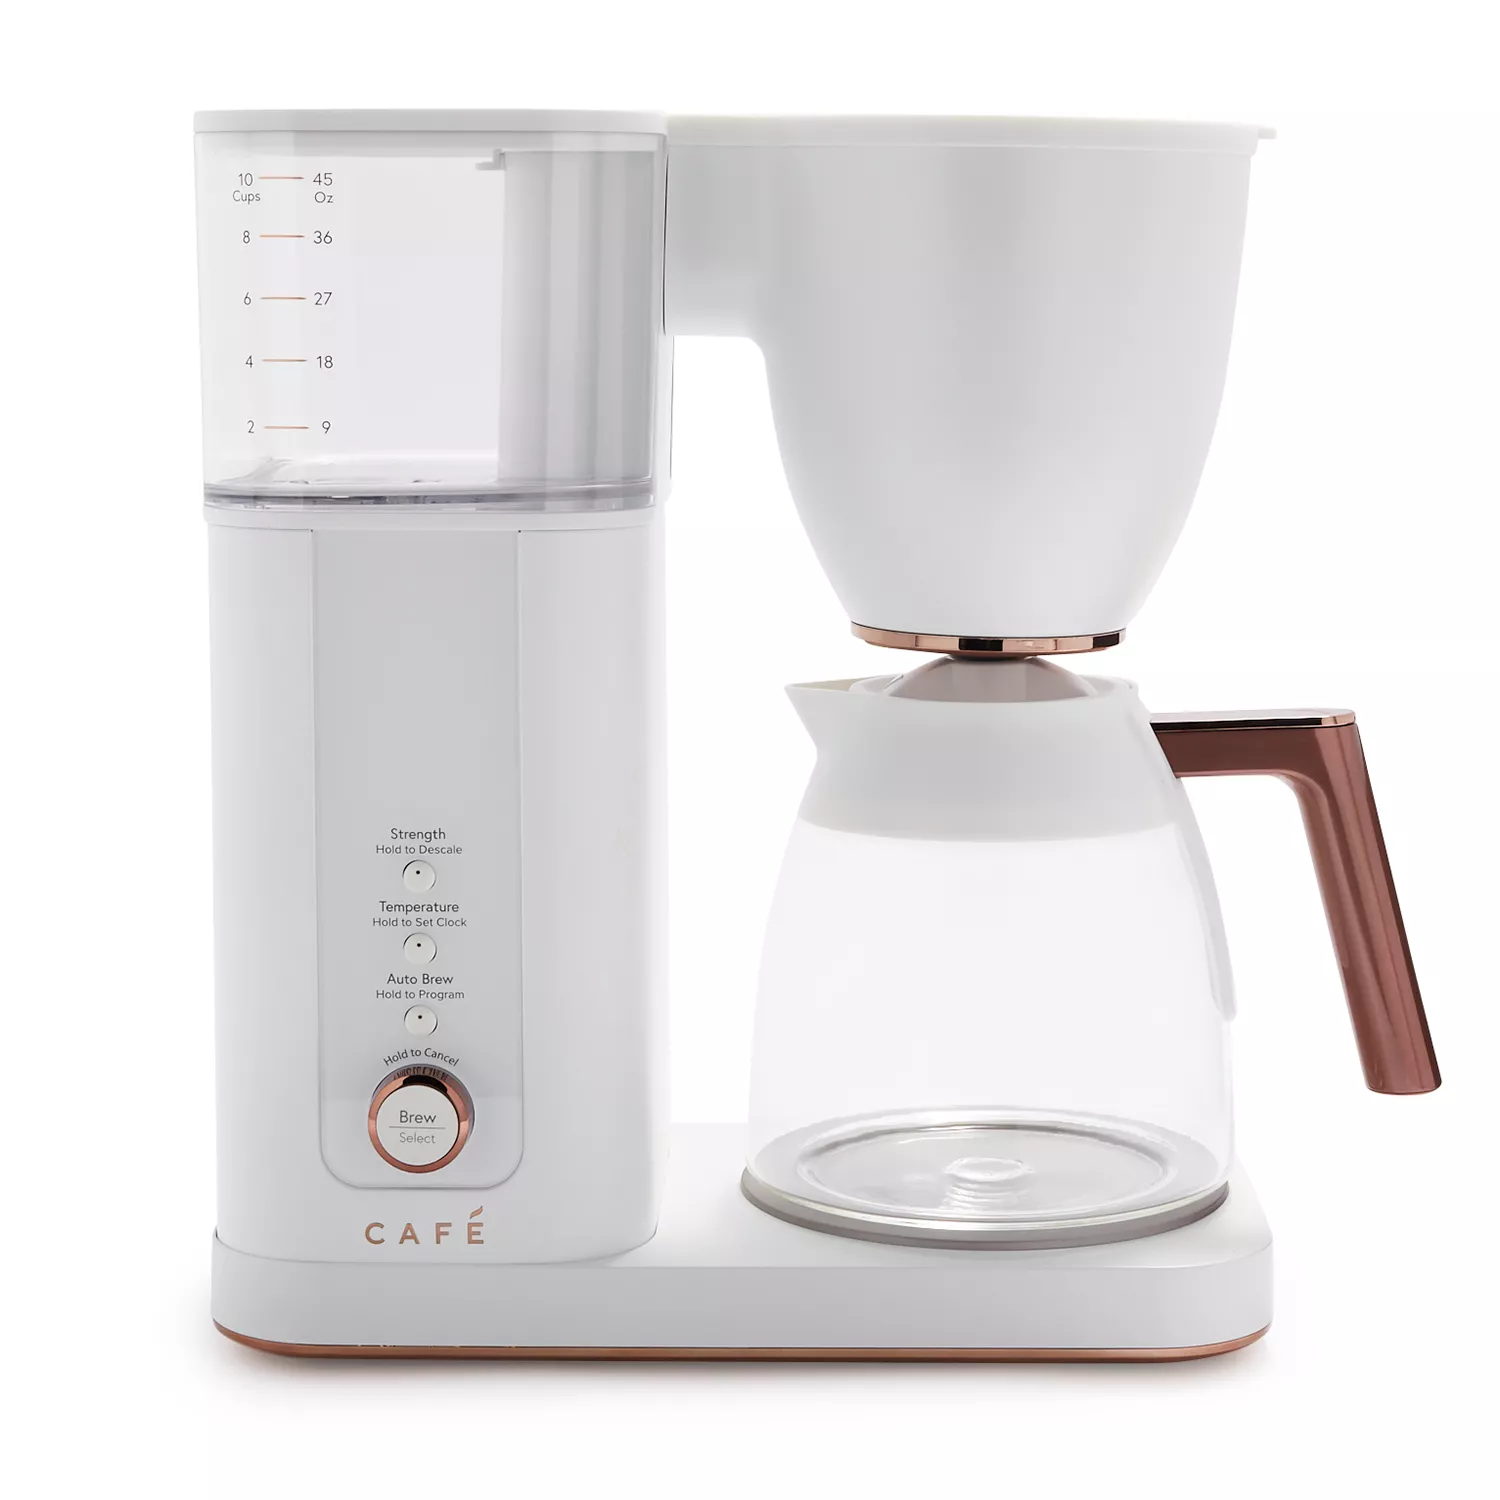 Cooks 10-Cup Thermal Coffeemaker Review, Price and Features